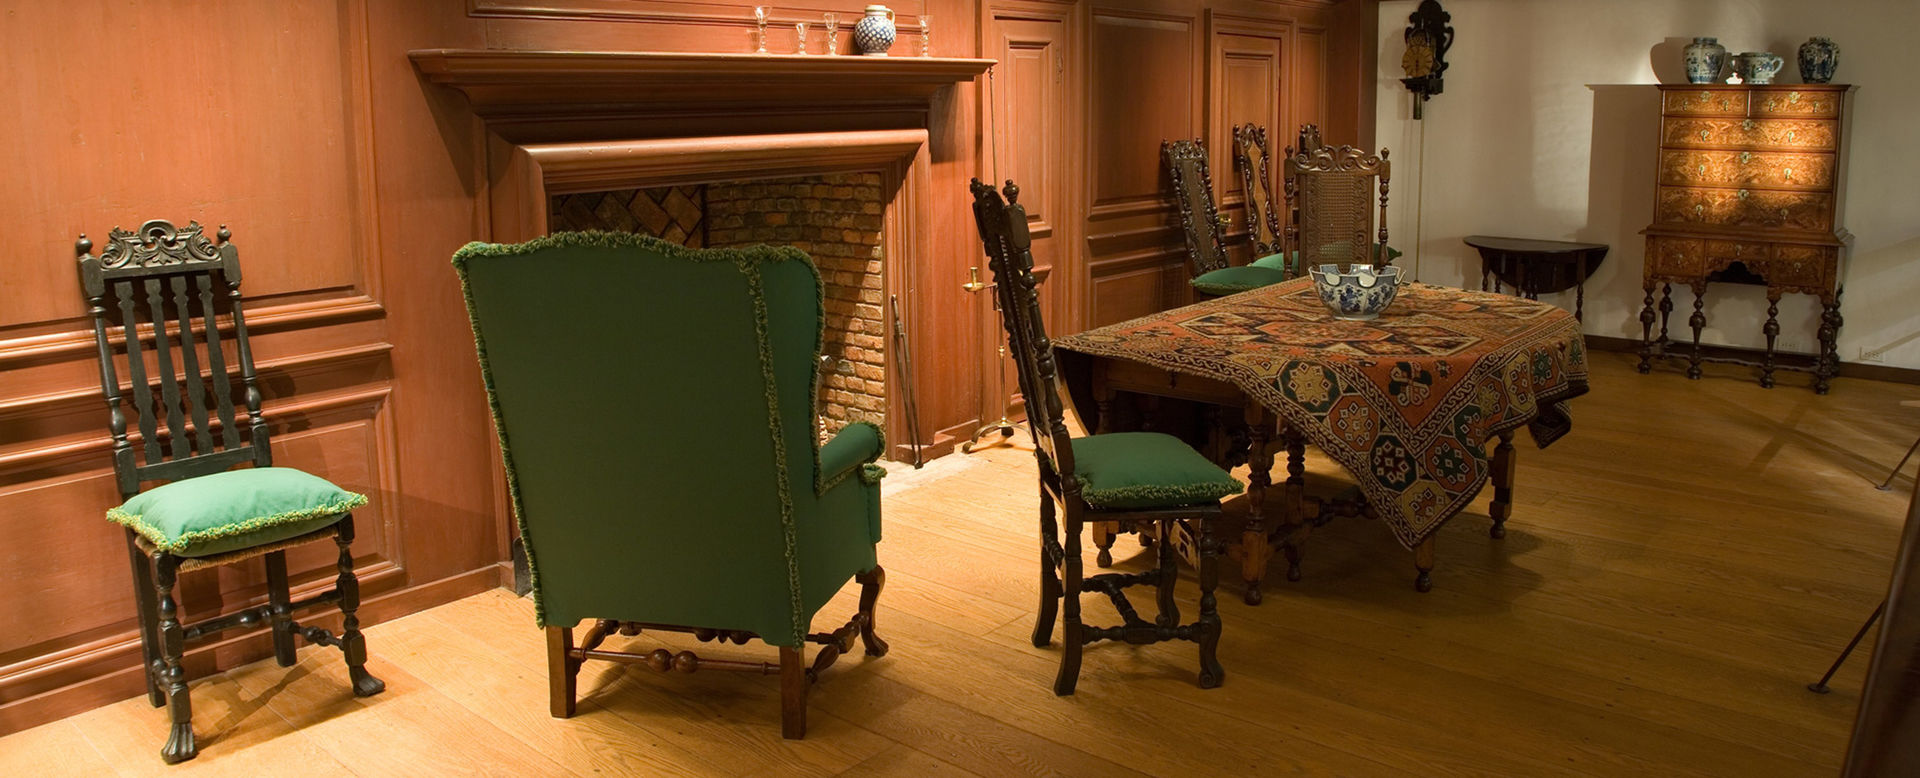 A green easy chair and a dining table draped with fabric installed in the Wentworth Room at The Met